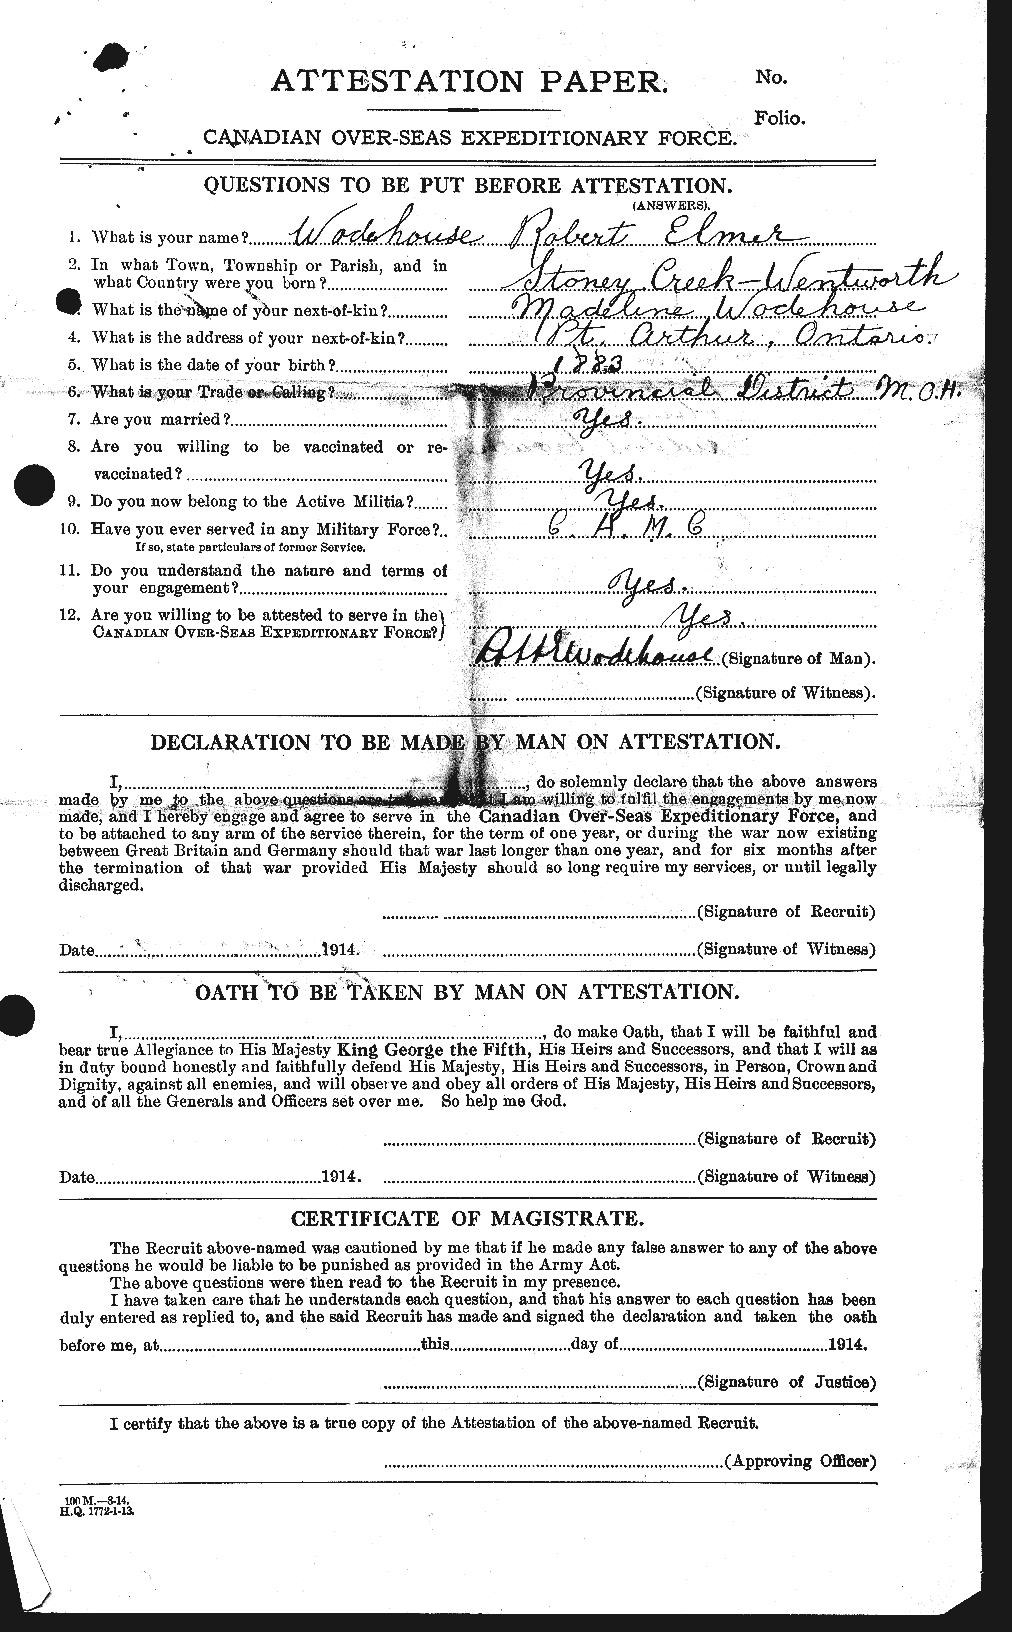 Personnel Records of the First World War - CEF 682209a